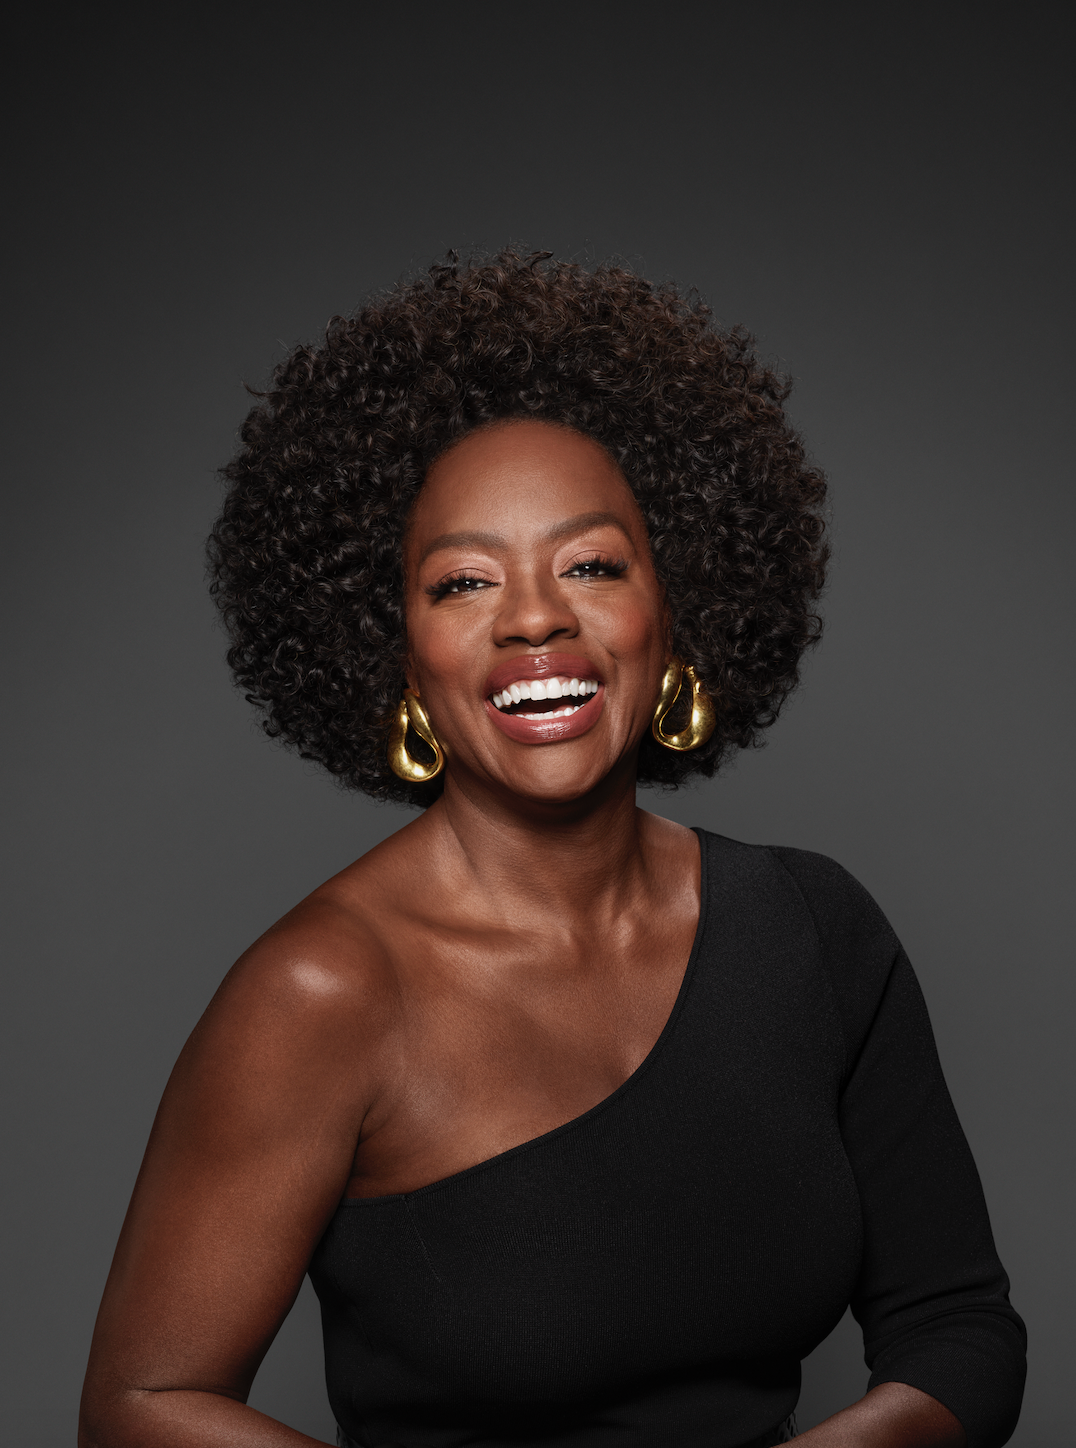 Actress Viola Davis On The Beauty Of Aging And The Importance Of Apologizing To Her Daughter